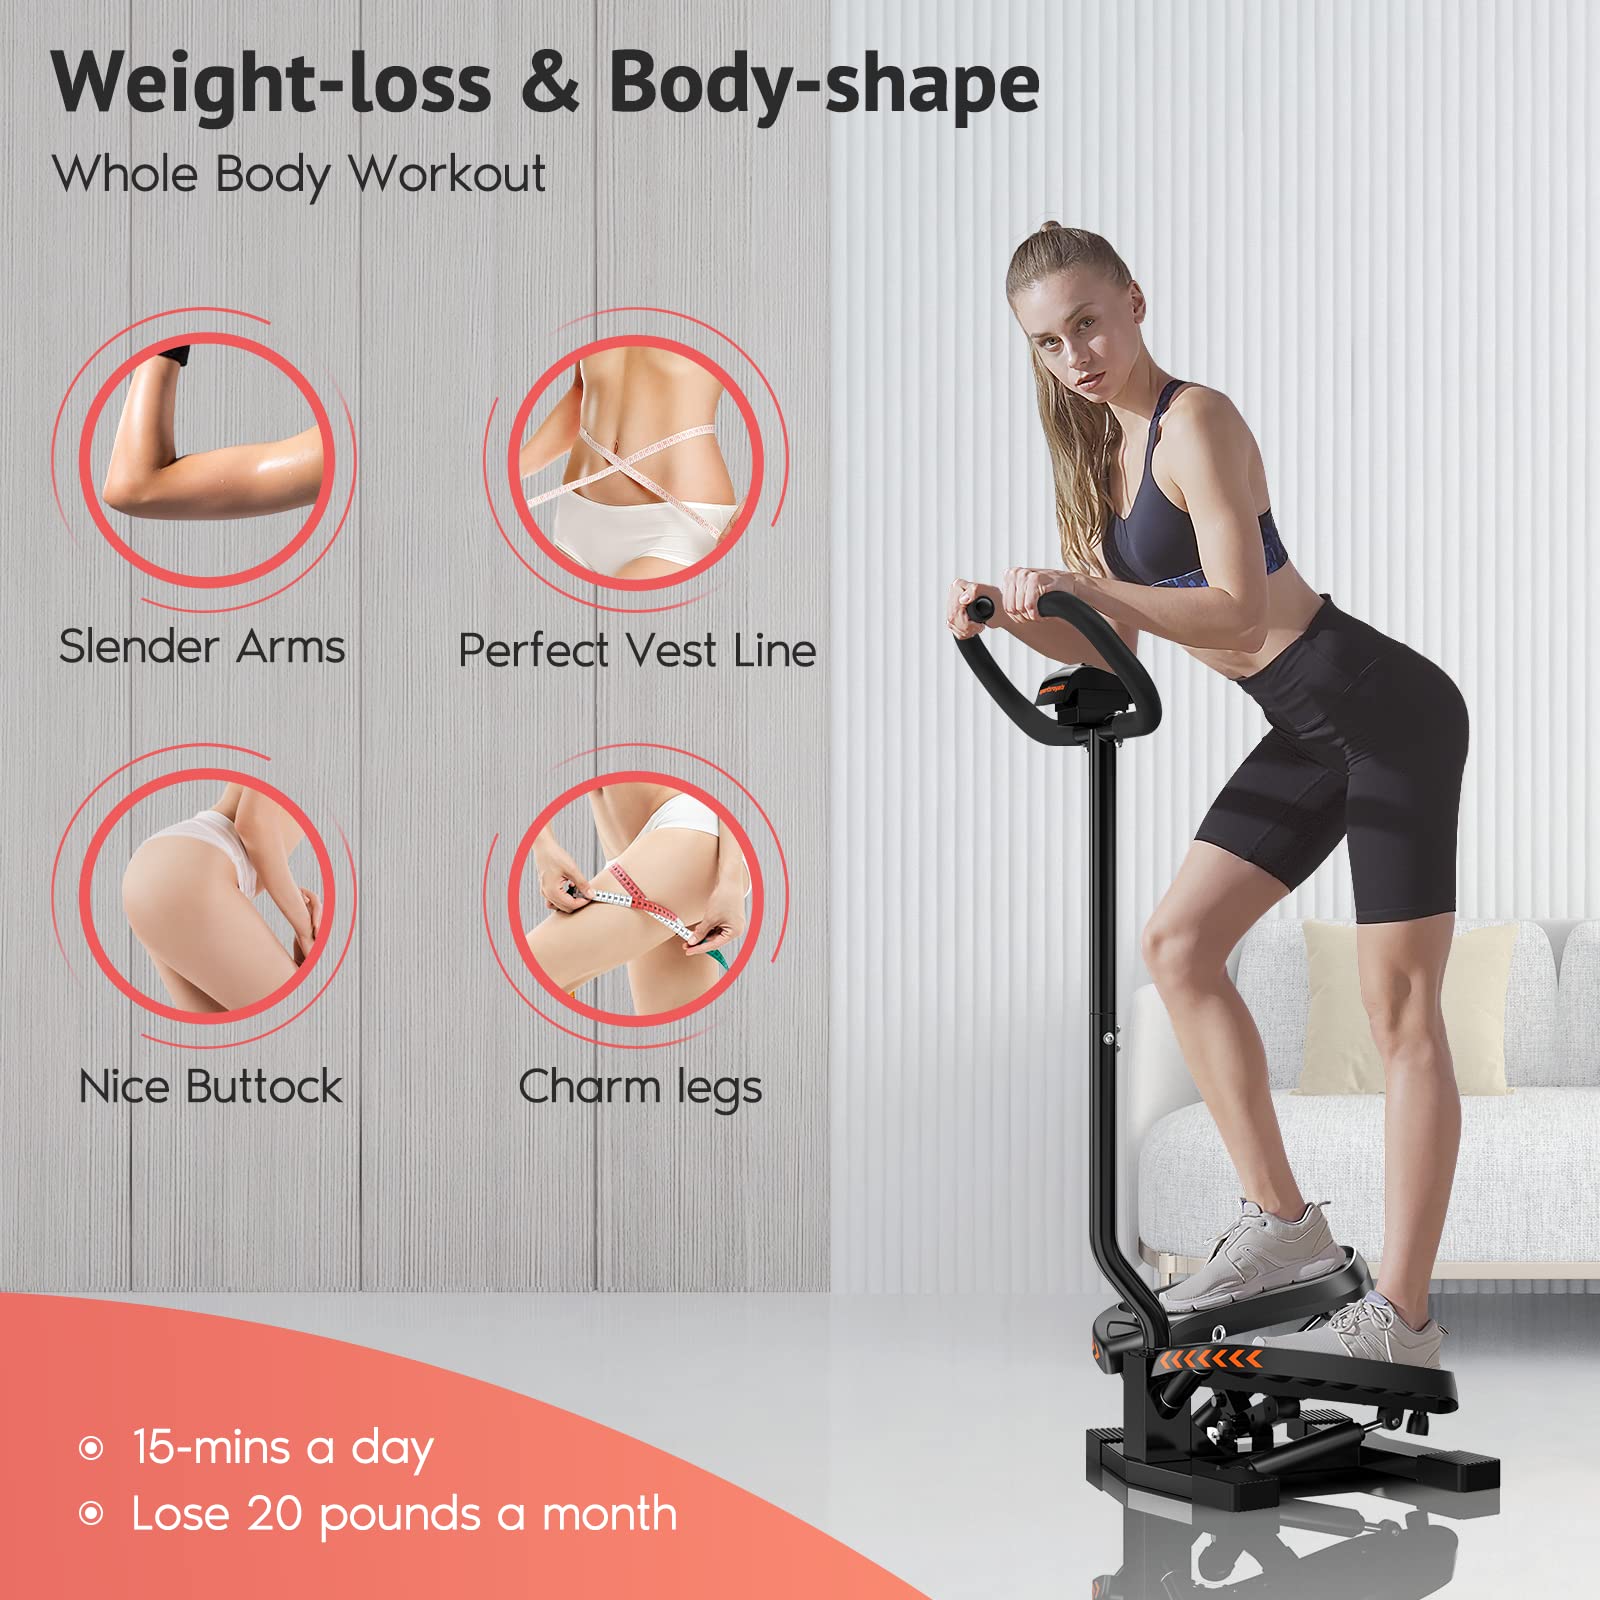 Sportsroyals Stair Stepper for Exercises-Twist Stepper with Handlebar and Resistance Bands for 330lbs Weight Capacity